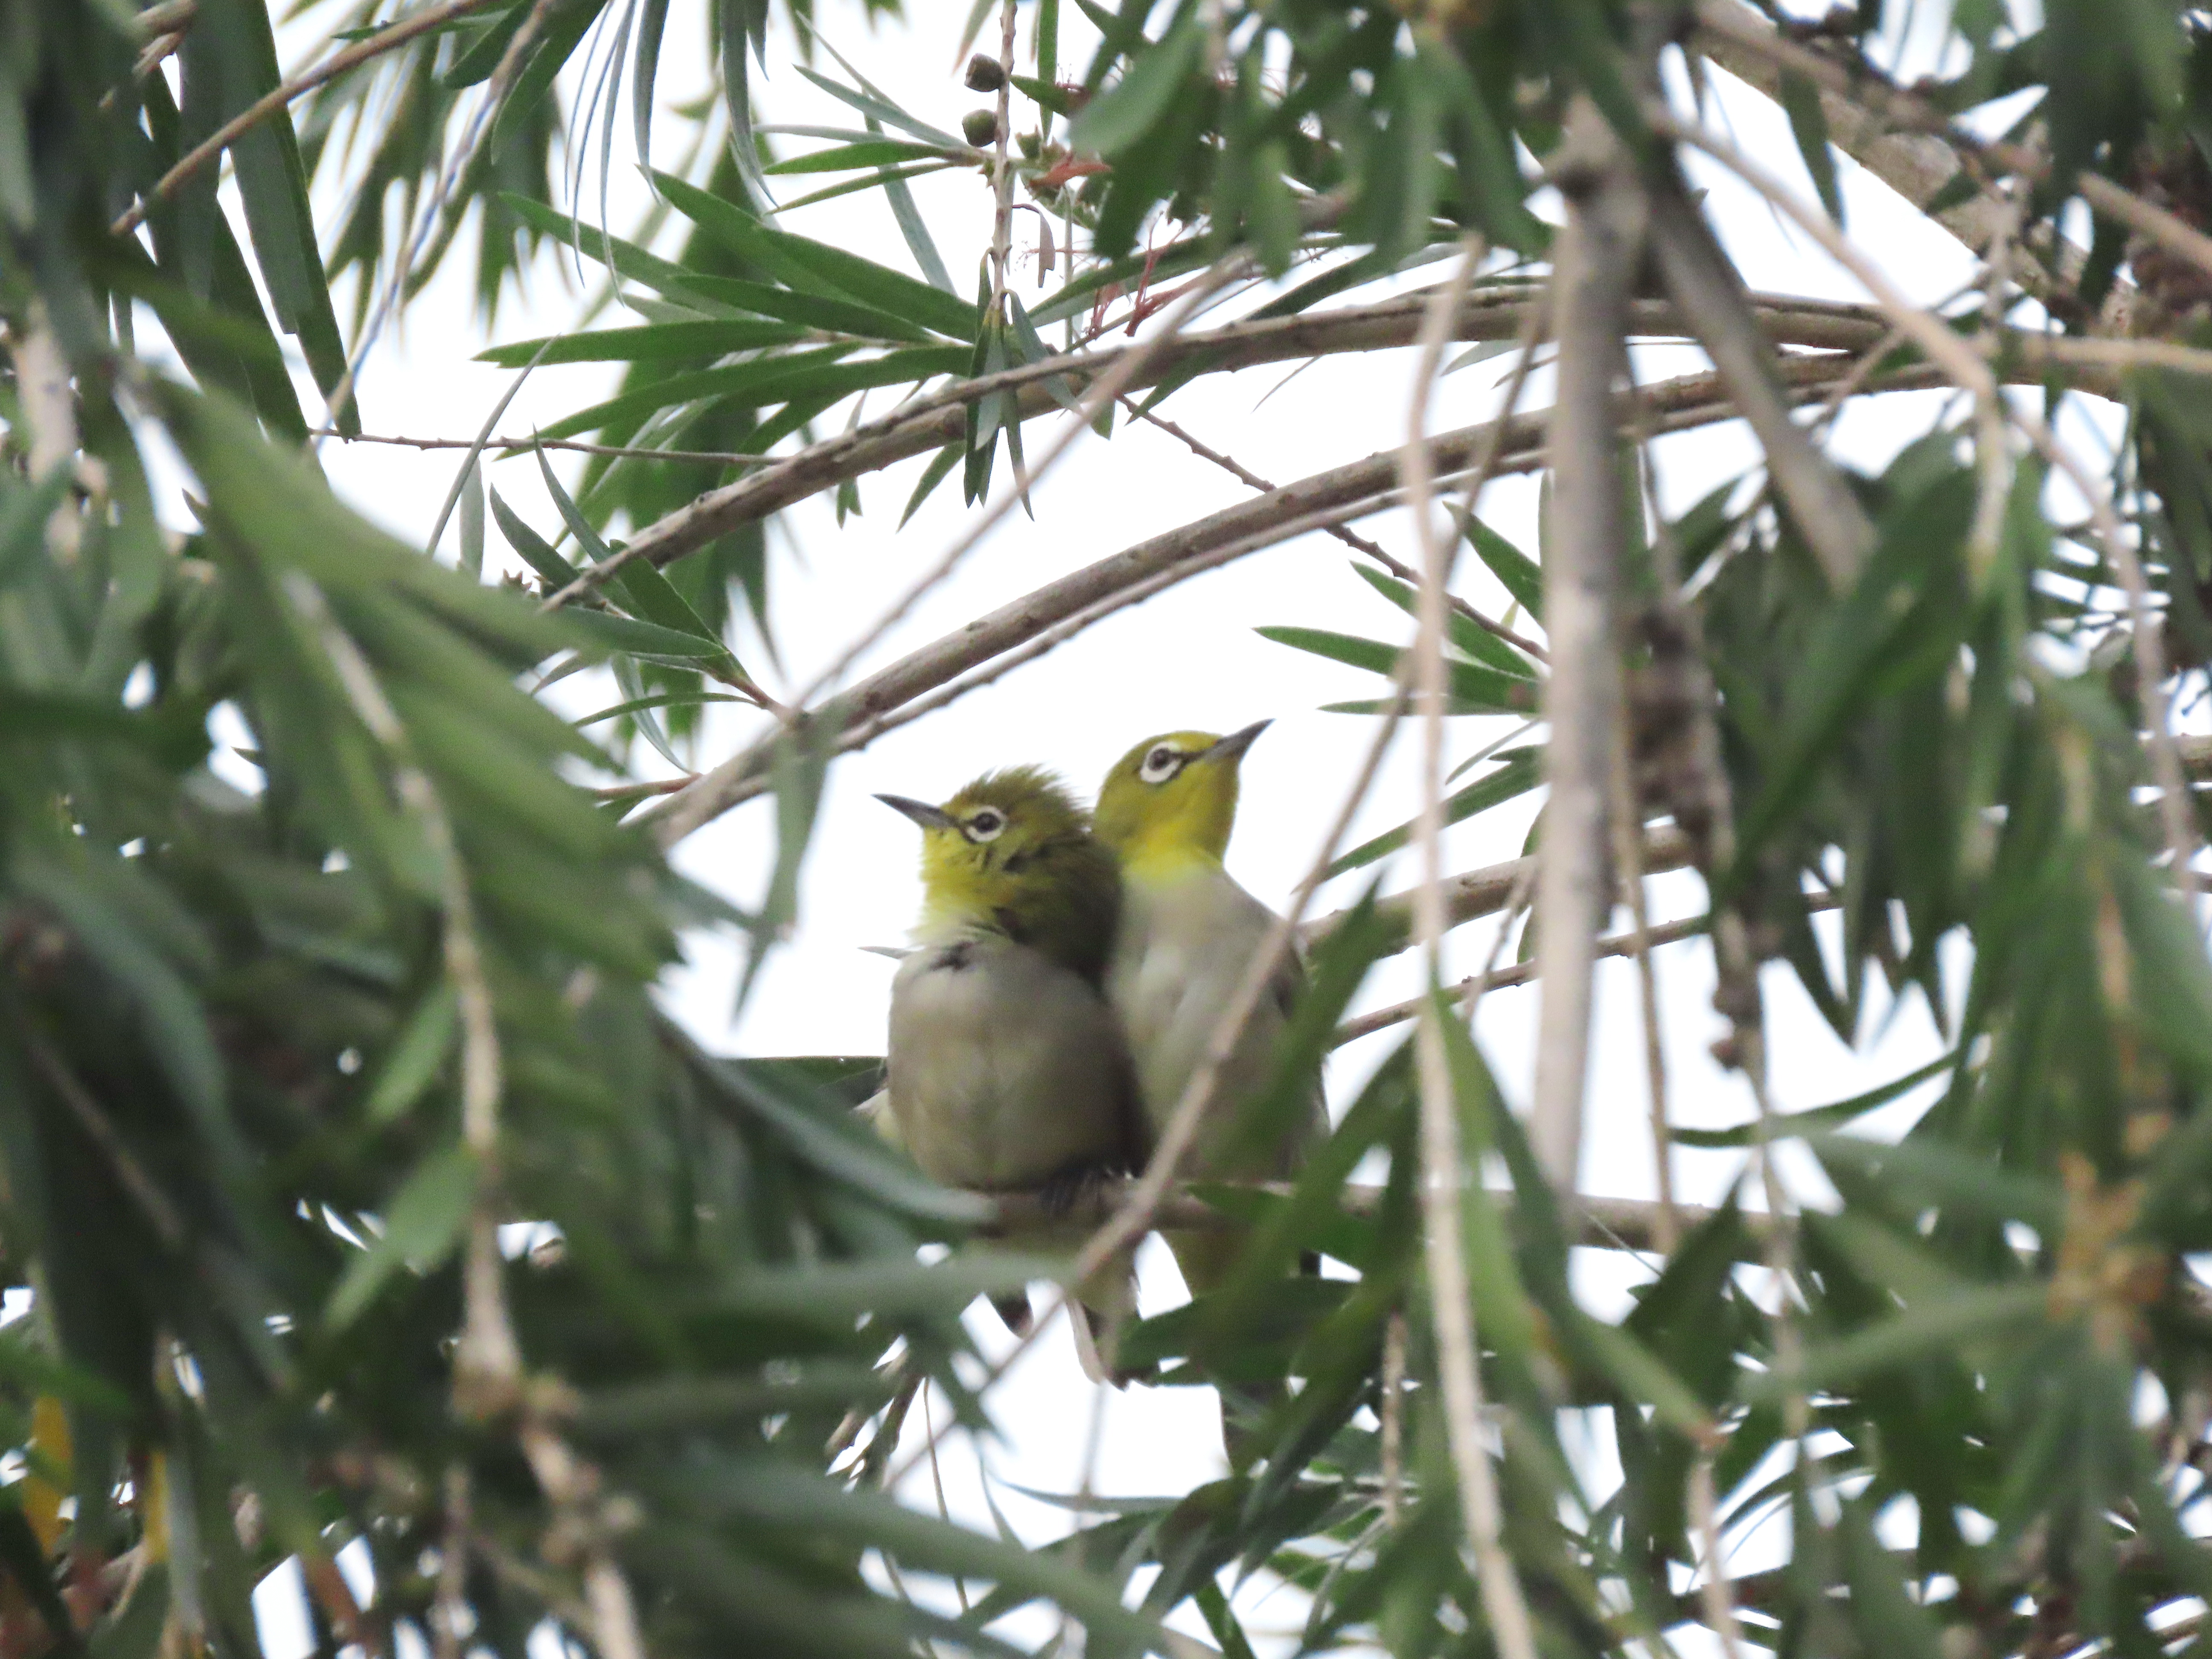 White-eye pair displays love in public in southern China